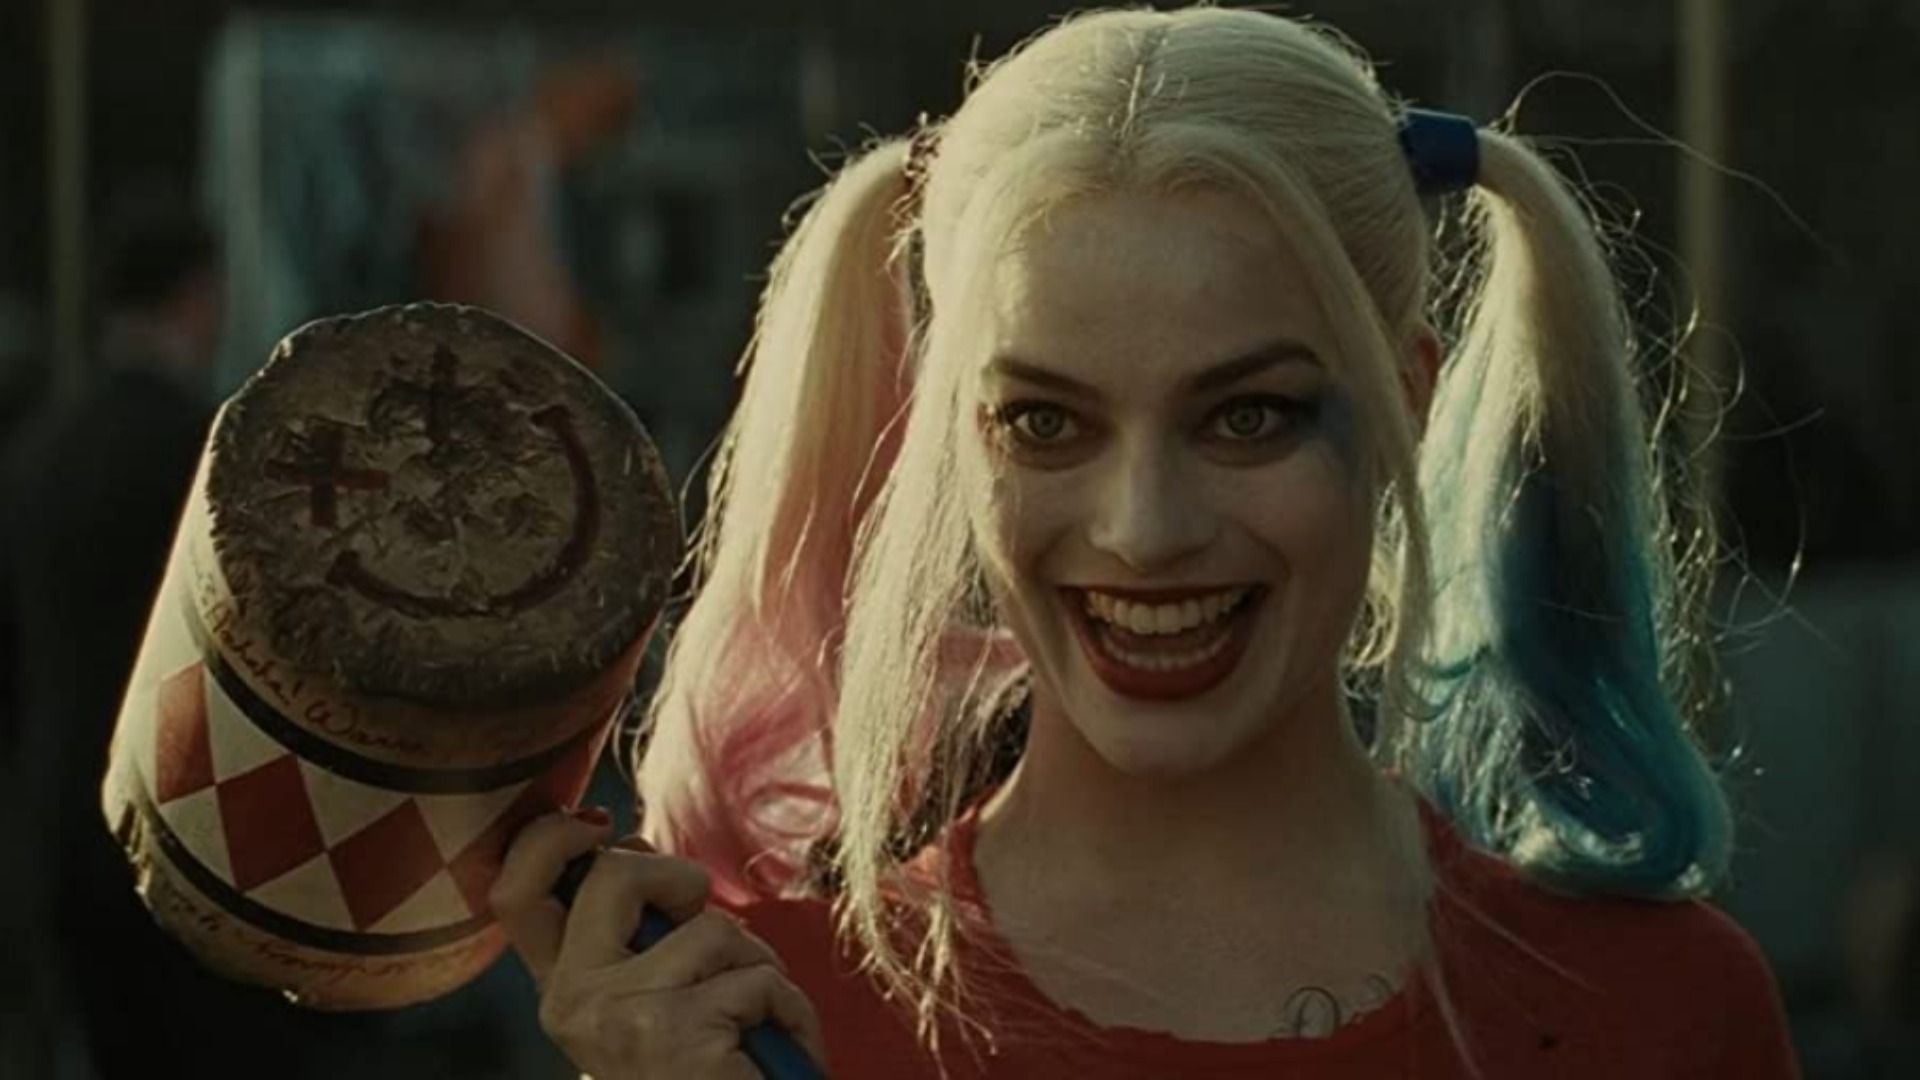 The Suicide Squad director James Gunn confirms the movie's rating